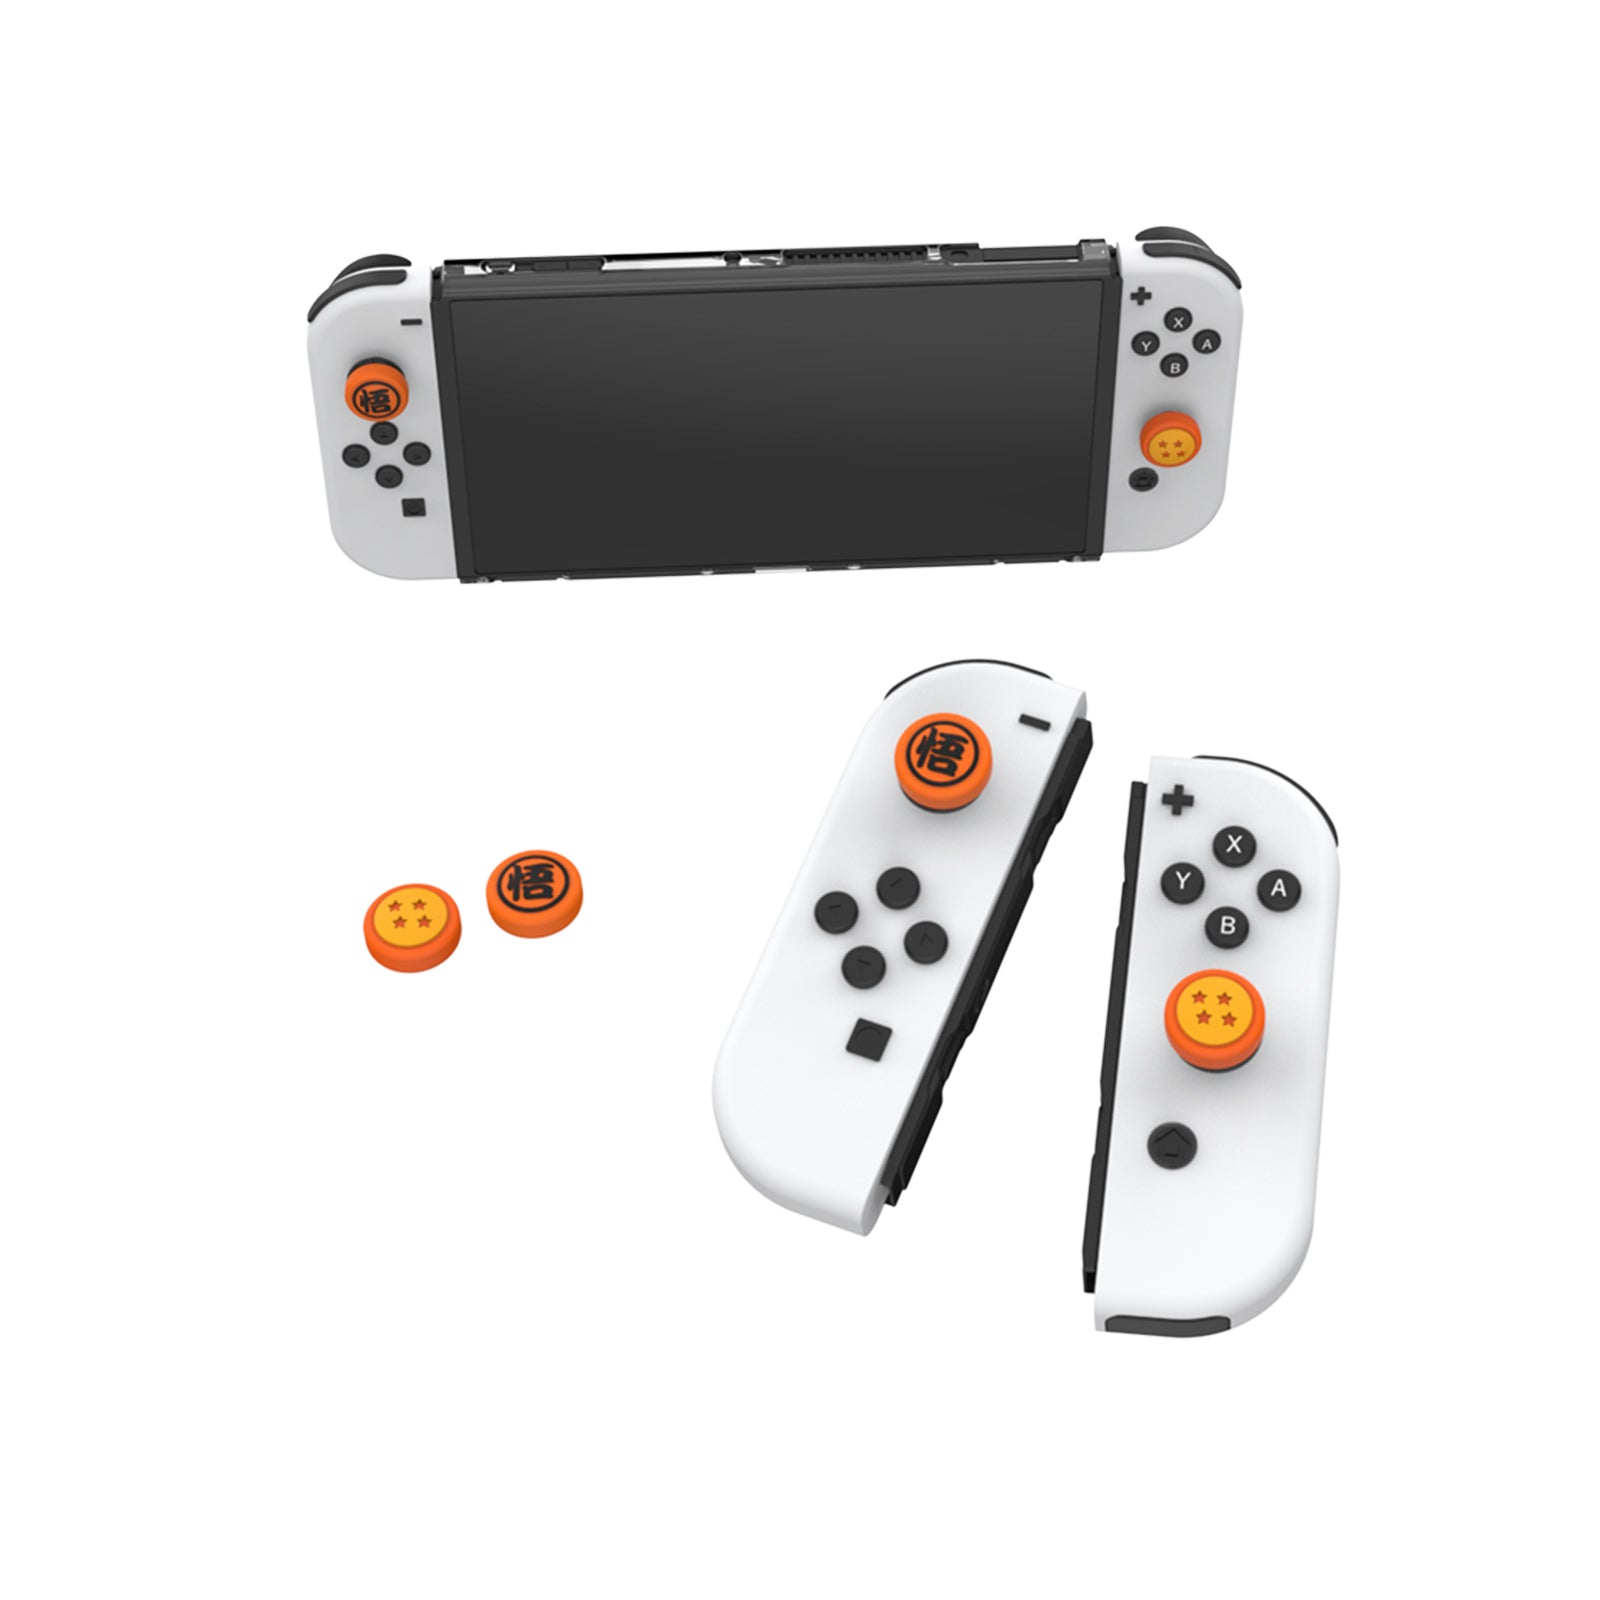 IINE DragonBall Game Accessories for Nintendo Switch – IINE Official Store